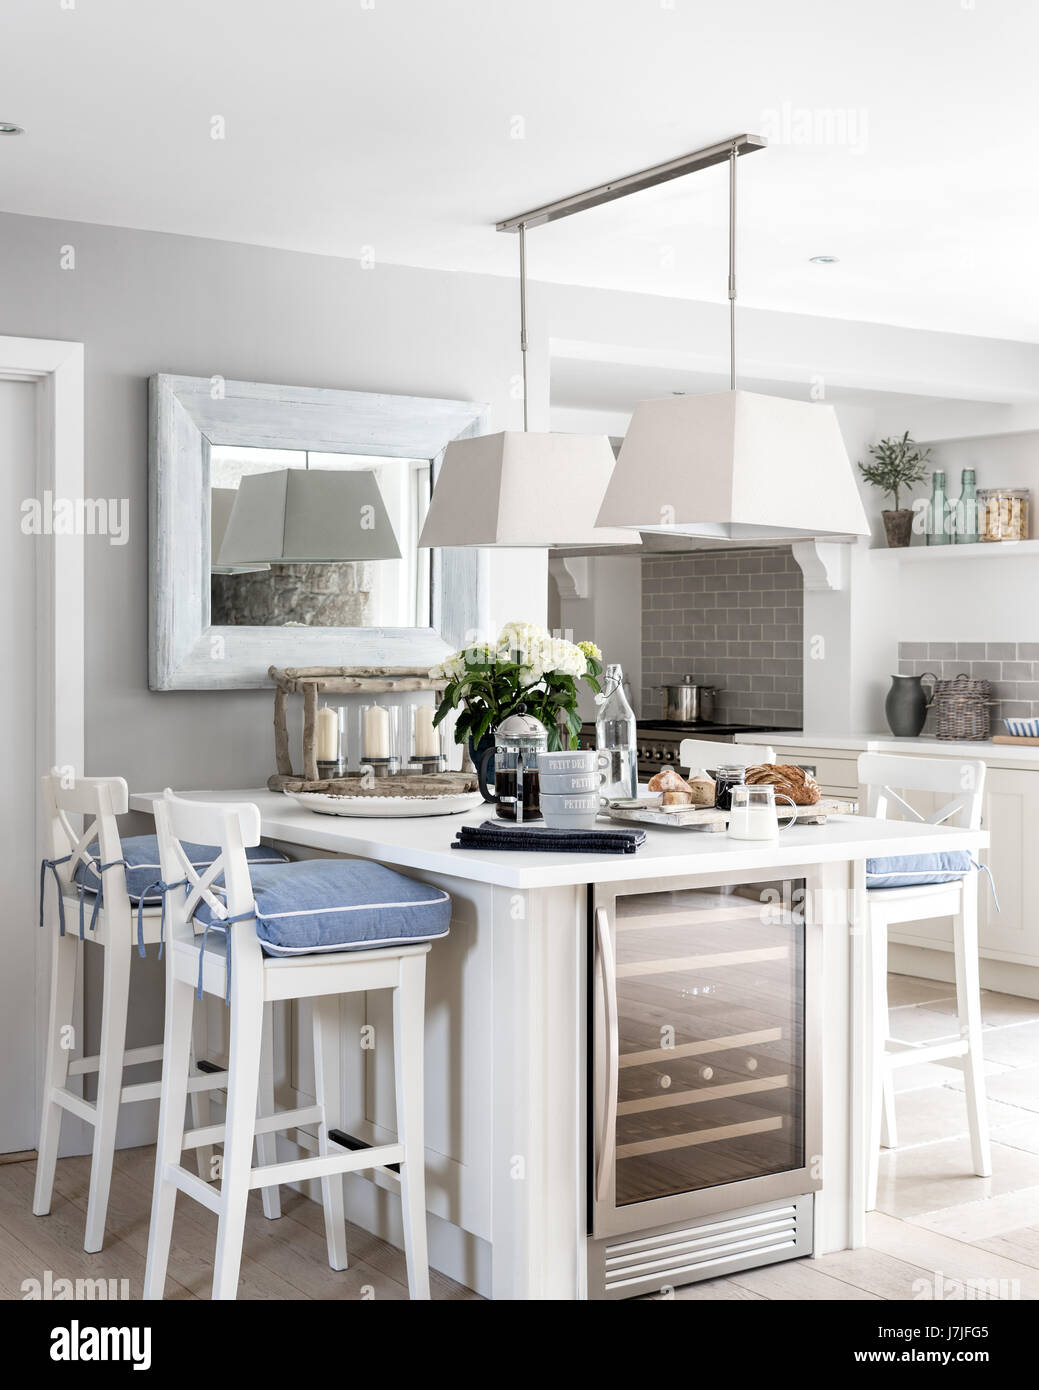 Breakfast bar with white Ingolf bar stools from Ikea and chambray seat pads from The White Company. The pendant lights are by Neptune. Stock Photo